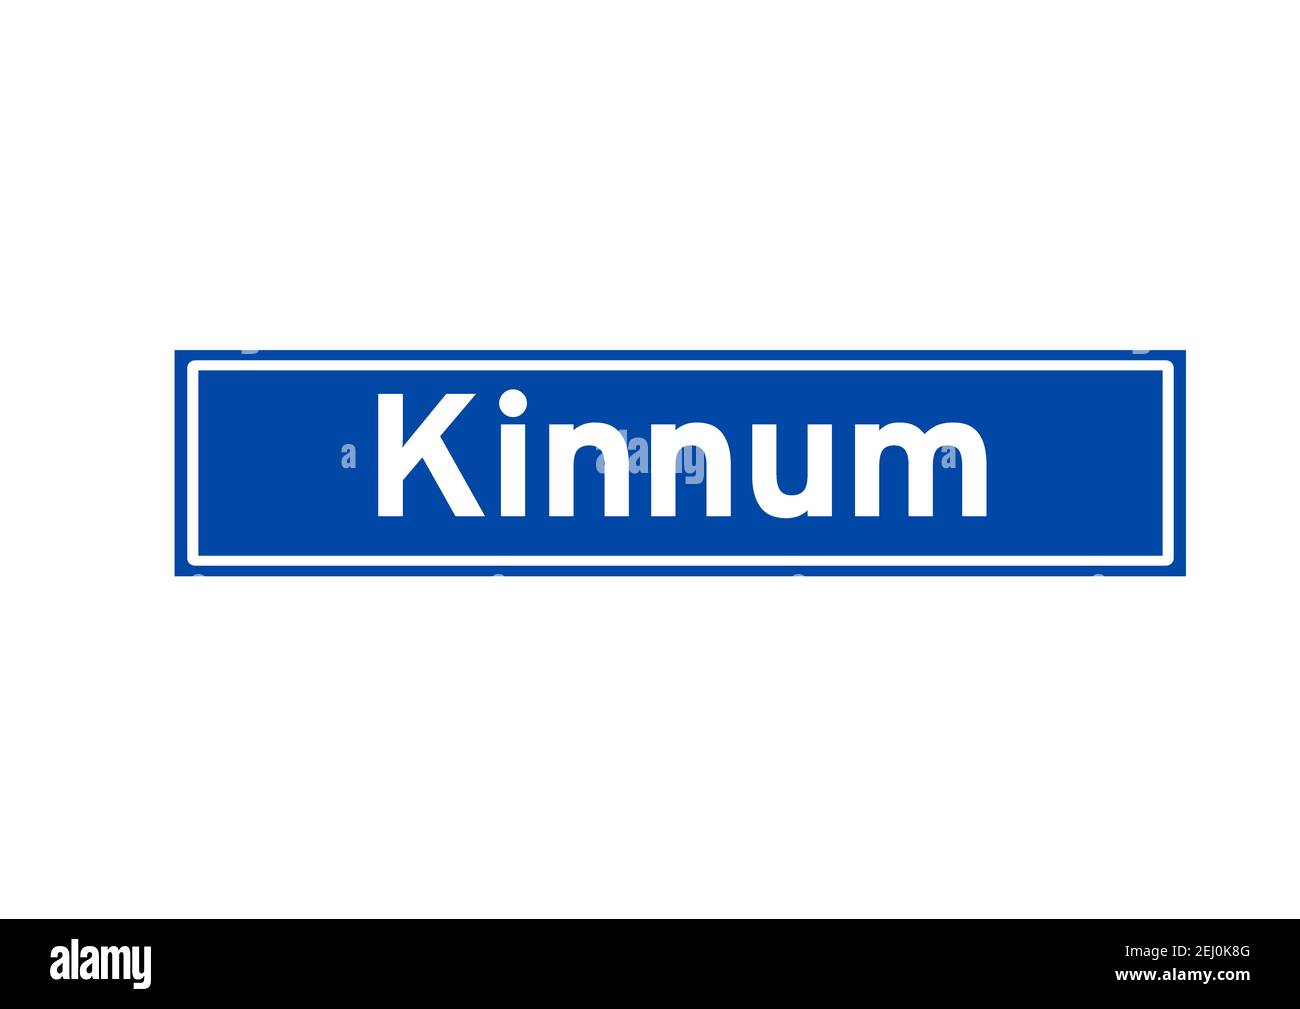 Kinnum isolated Dutch place name sign. City sign from the Netherlands. Stock Photo